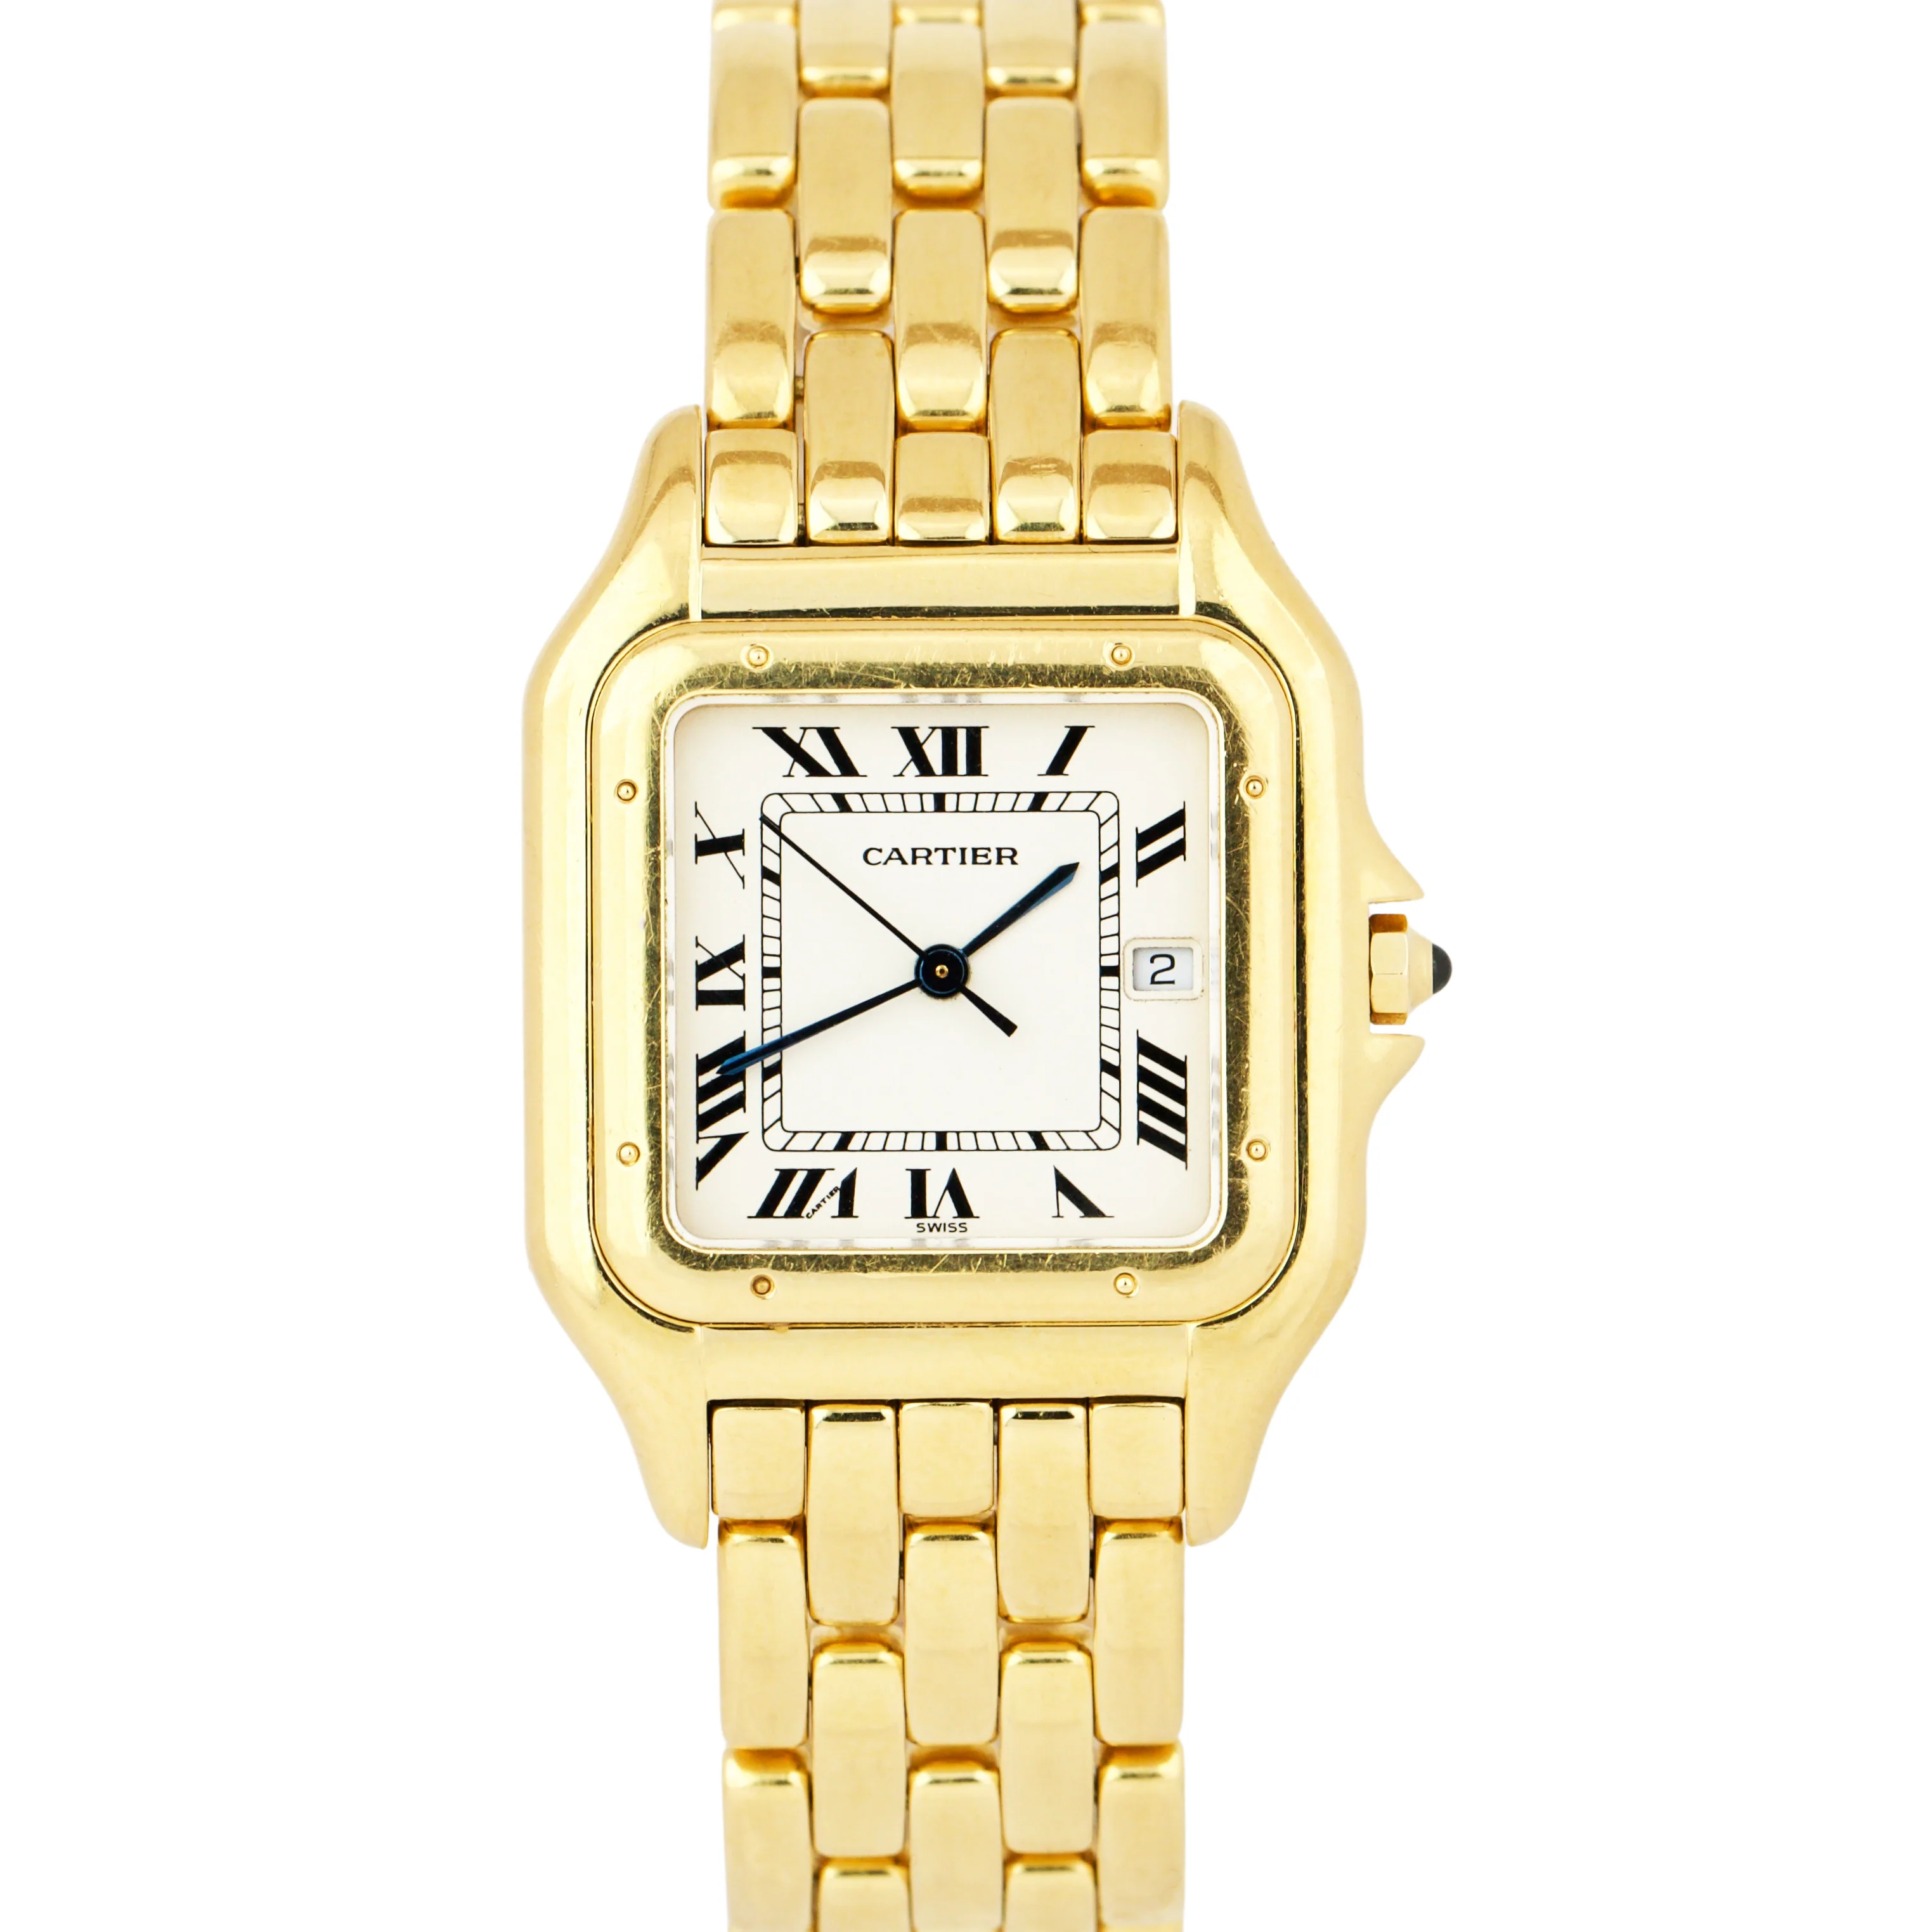 Panthere De Cartier 28mm 18K Yellow Gold Watch Only 